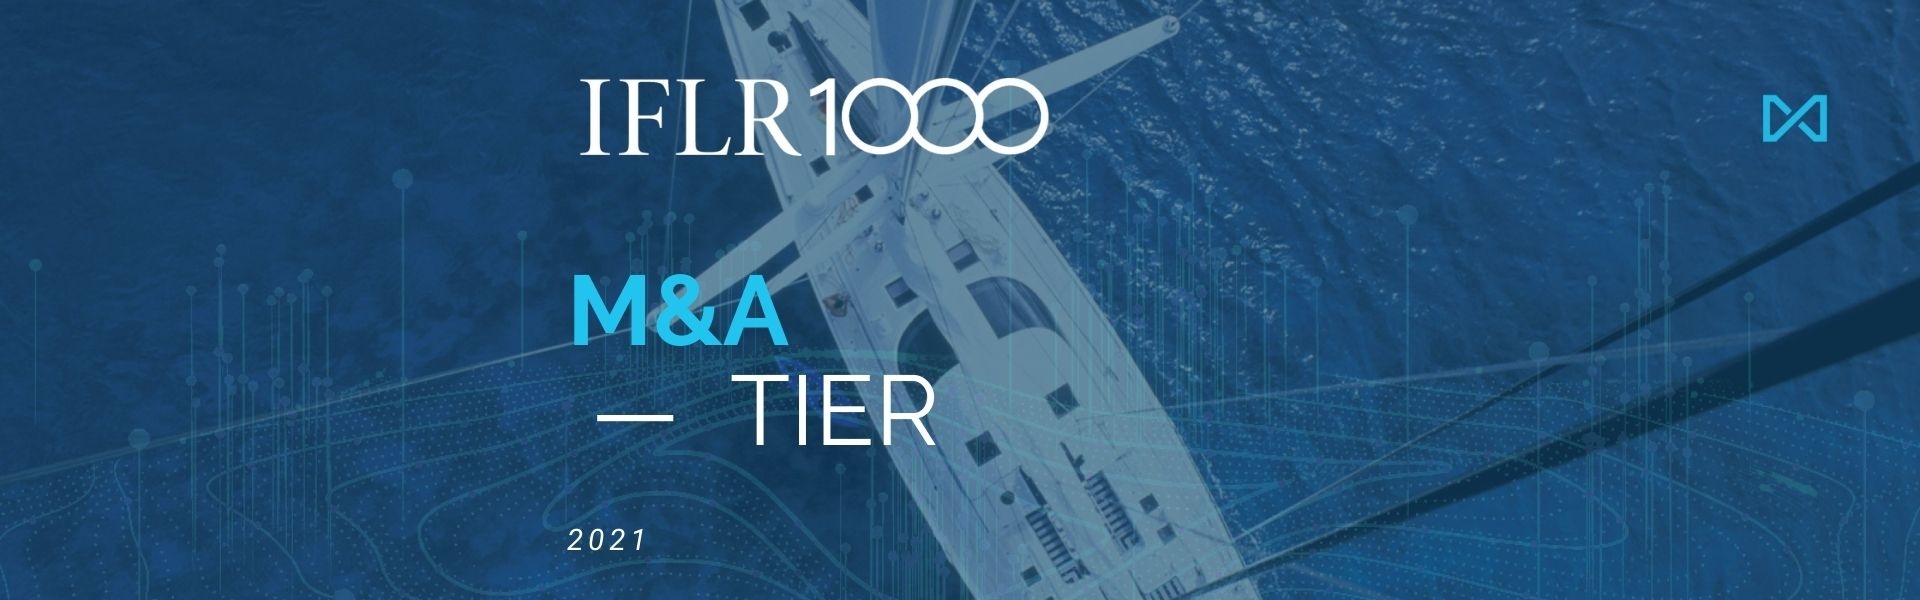 EVERLEGAL is among leaders in M&A according to IFLR1000 ranking